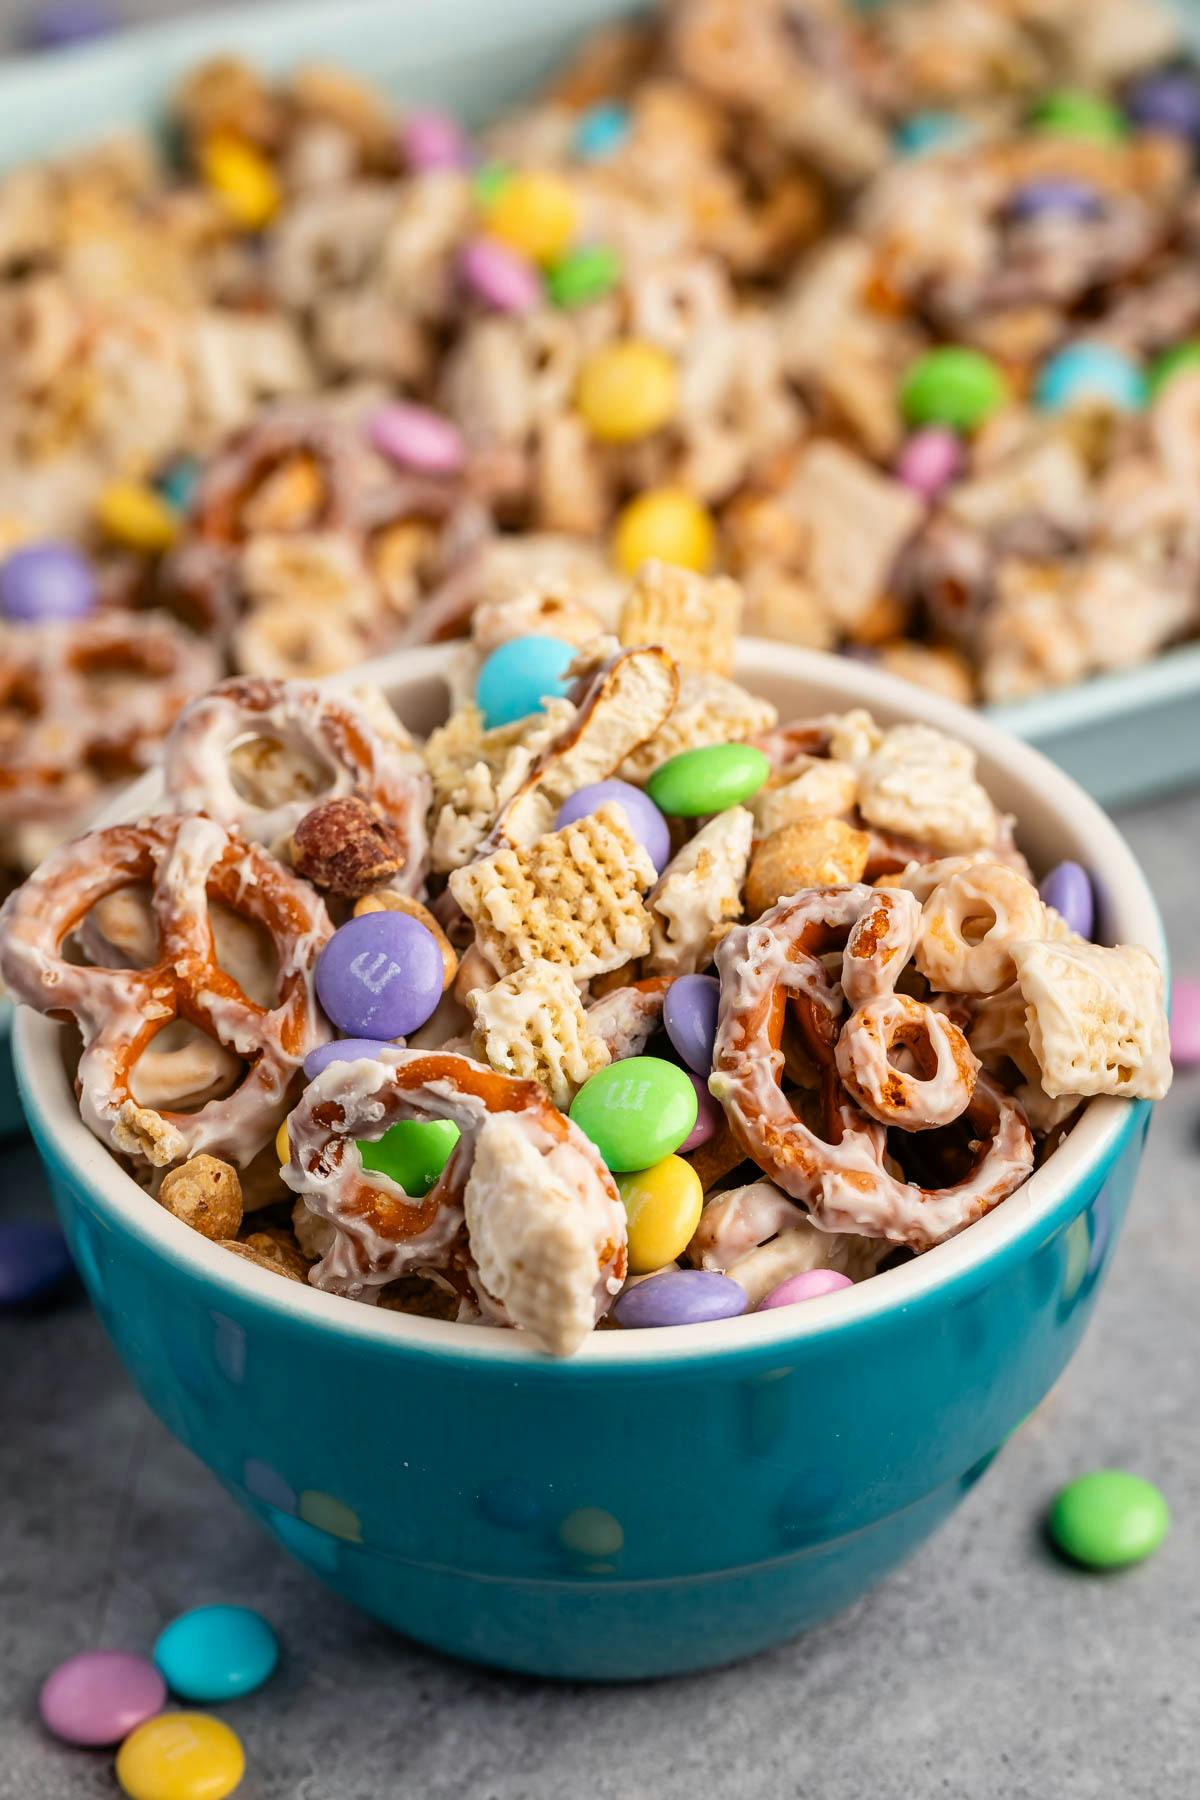 pretzels and chocolate candy mixed together in a teal bowl.